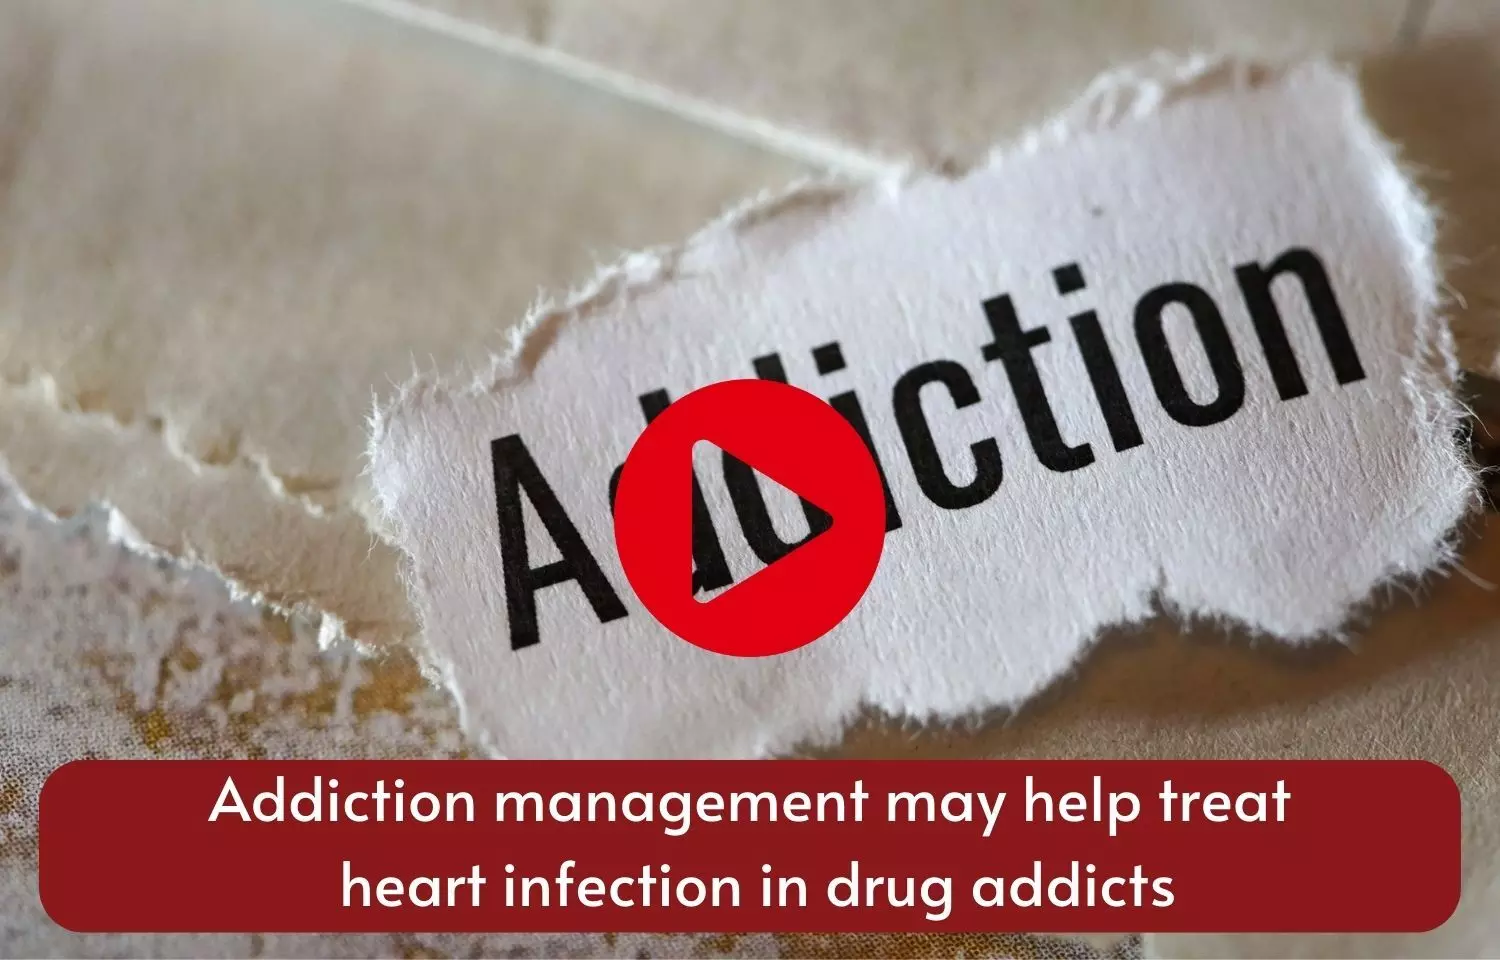 Addiction management may help treat heart infection in drug addicts